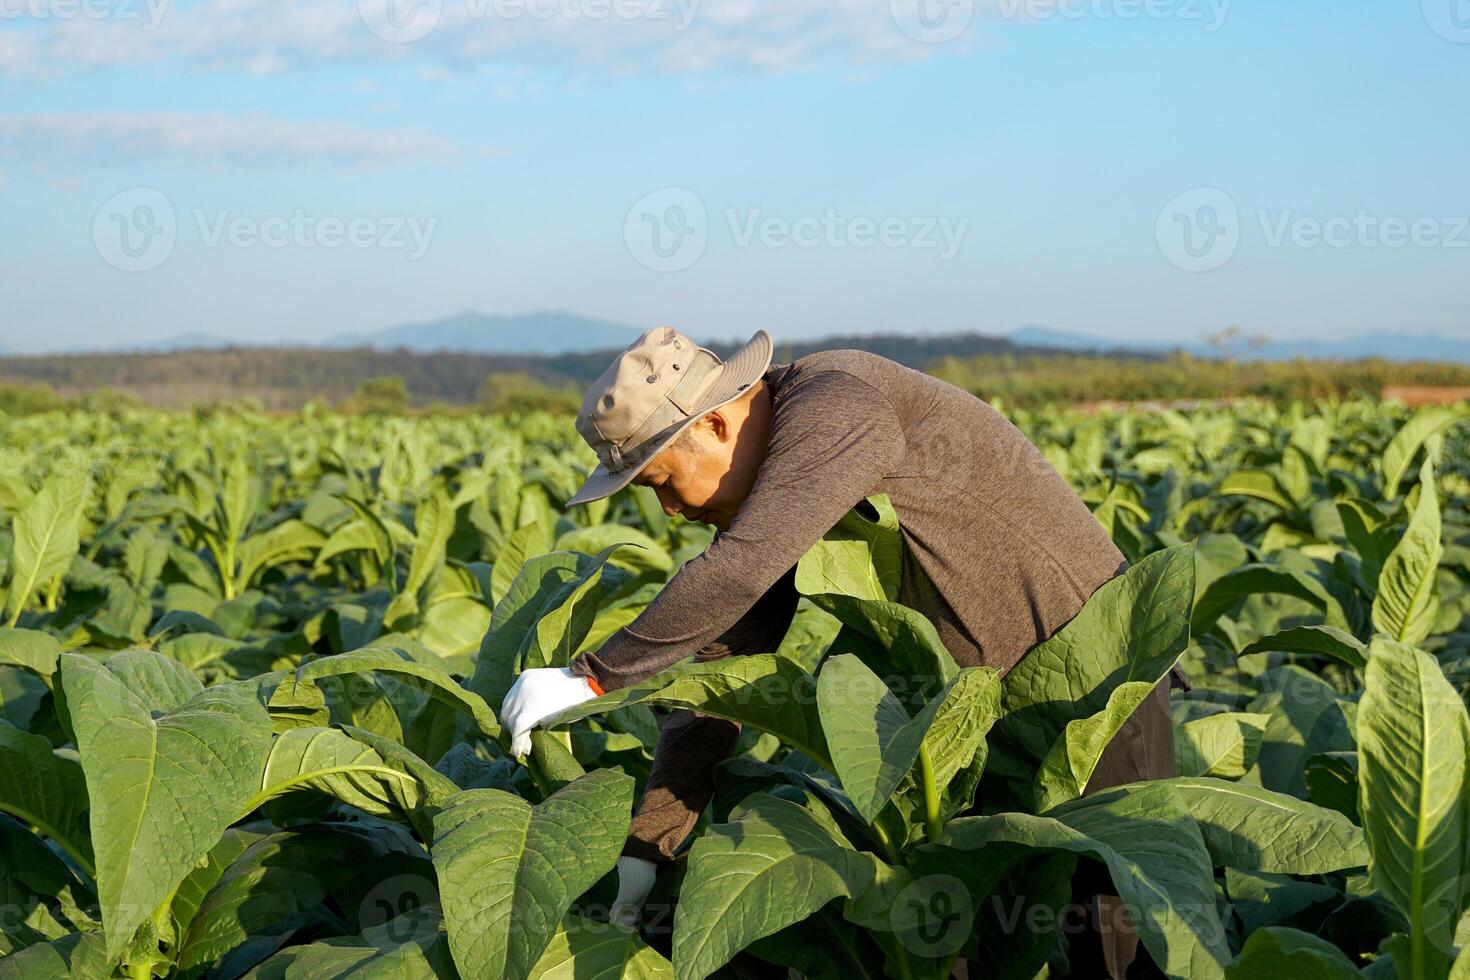 Tobacco farmers are tending the produce in their tobacco fields. Tobacco leaves contain nicotine, so they are used to make tobacco. Pungent drugs and use of cigarettes. Soft and selective focus. photo